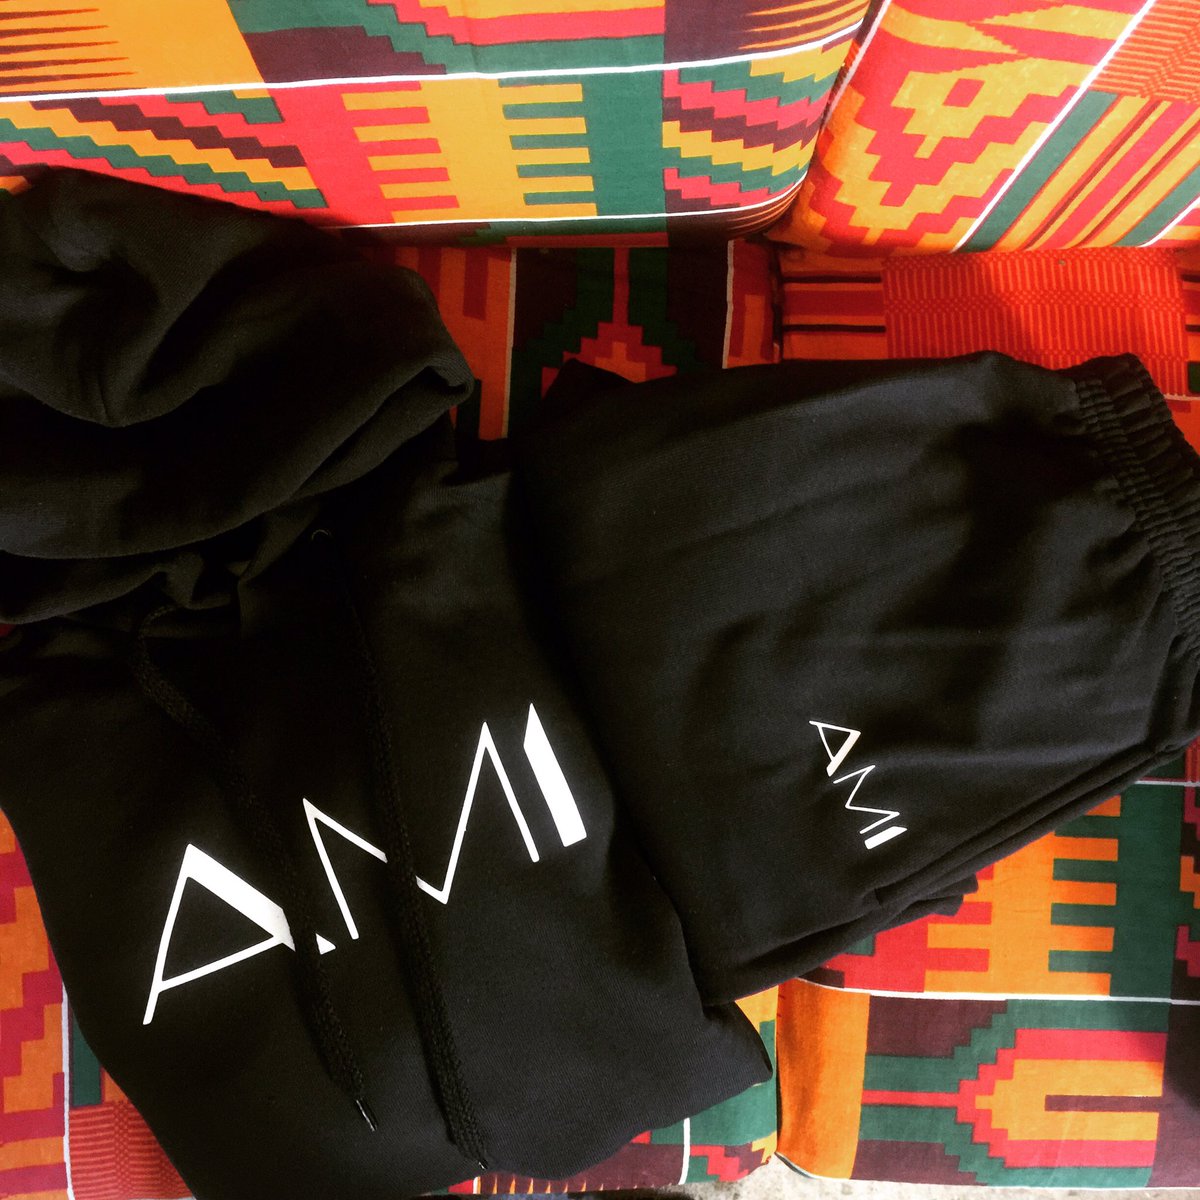 Custom matching tracksuit for AM1 💥 Thank you for choosing us 💥Contact us to create your own custom 📩 we’d love to hear from you ☎️ #BAMFAM #vinylprinting #heatpress #tshirtprinting #tshirt #apparel #appareldesign #supportsmallbusiness #supportblackbusiness #blackpoundday